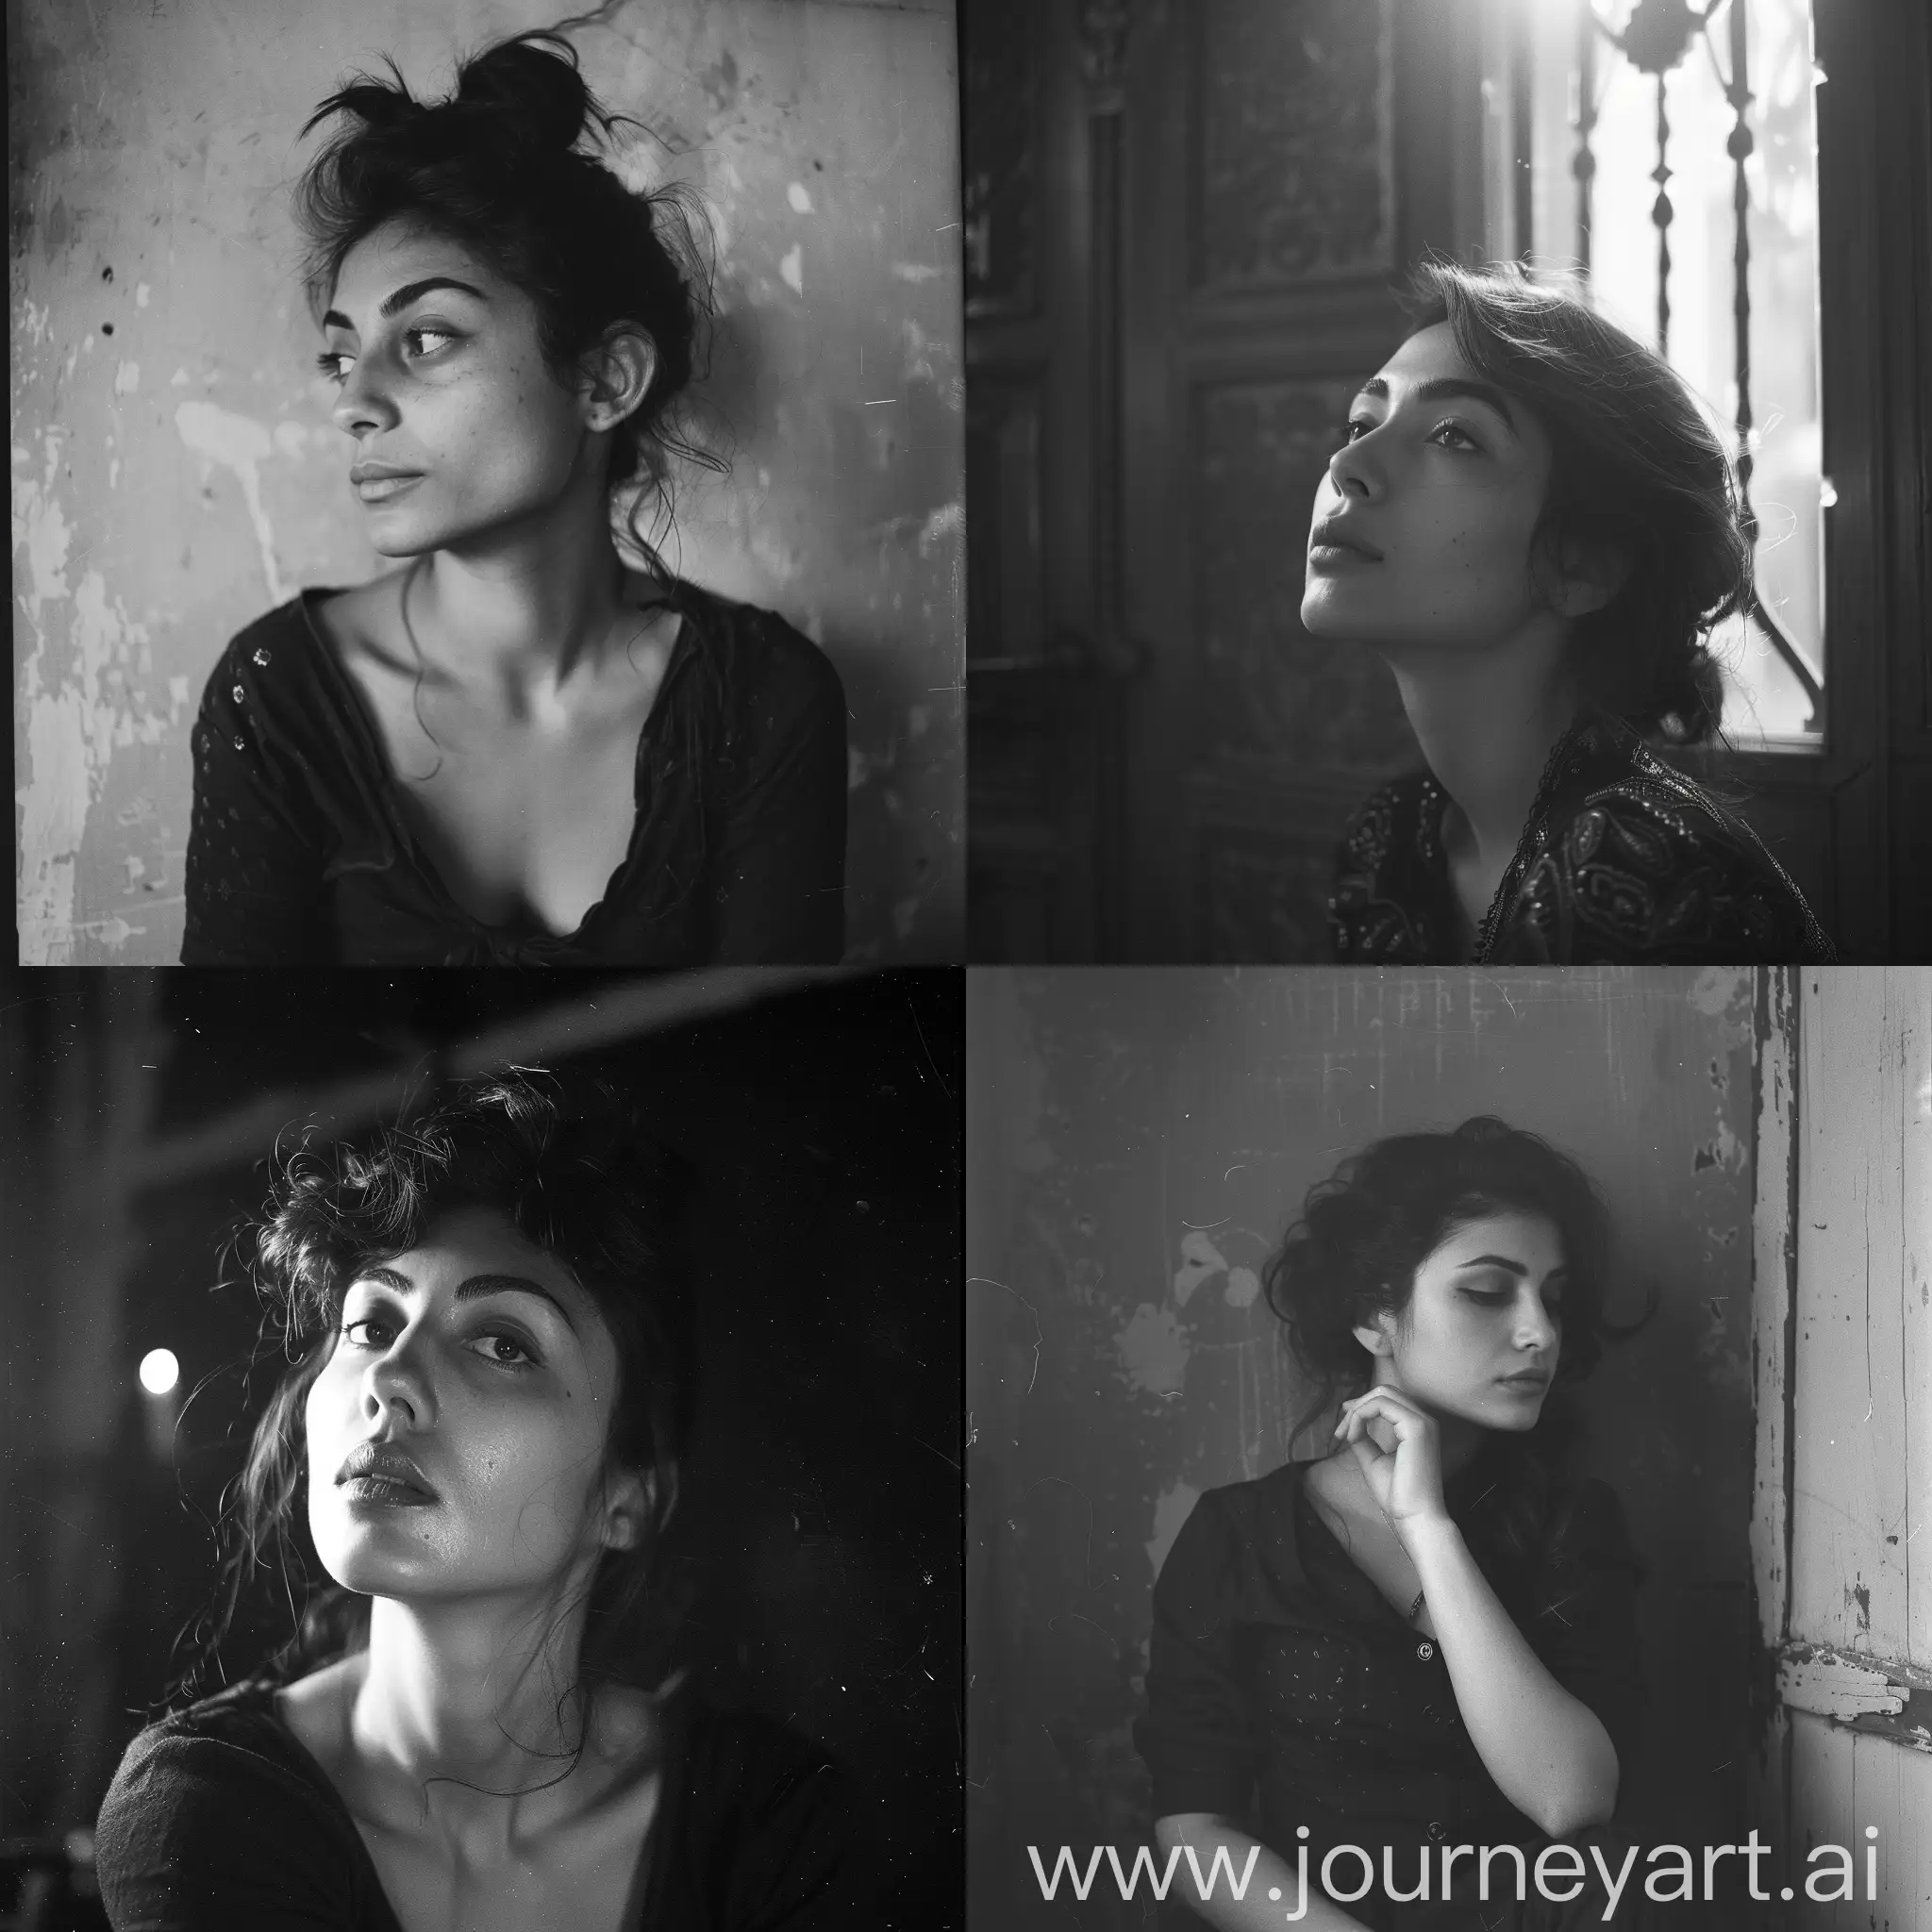 Multicultural-Woman-in-Vintage-Analog-Portrait-Photography